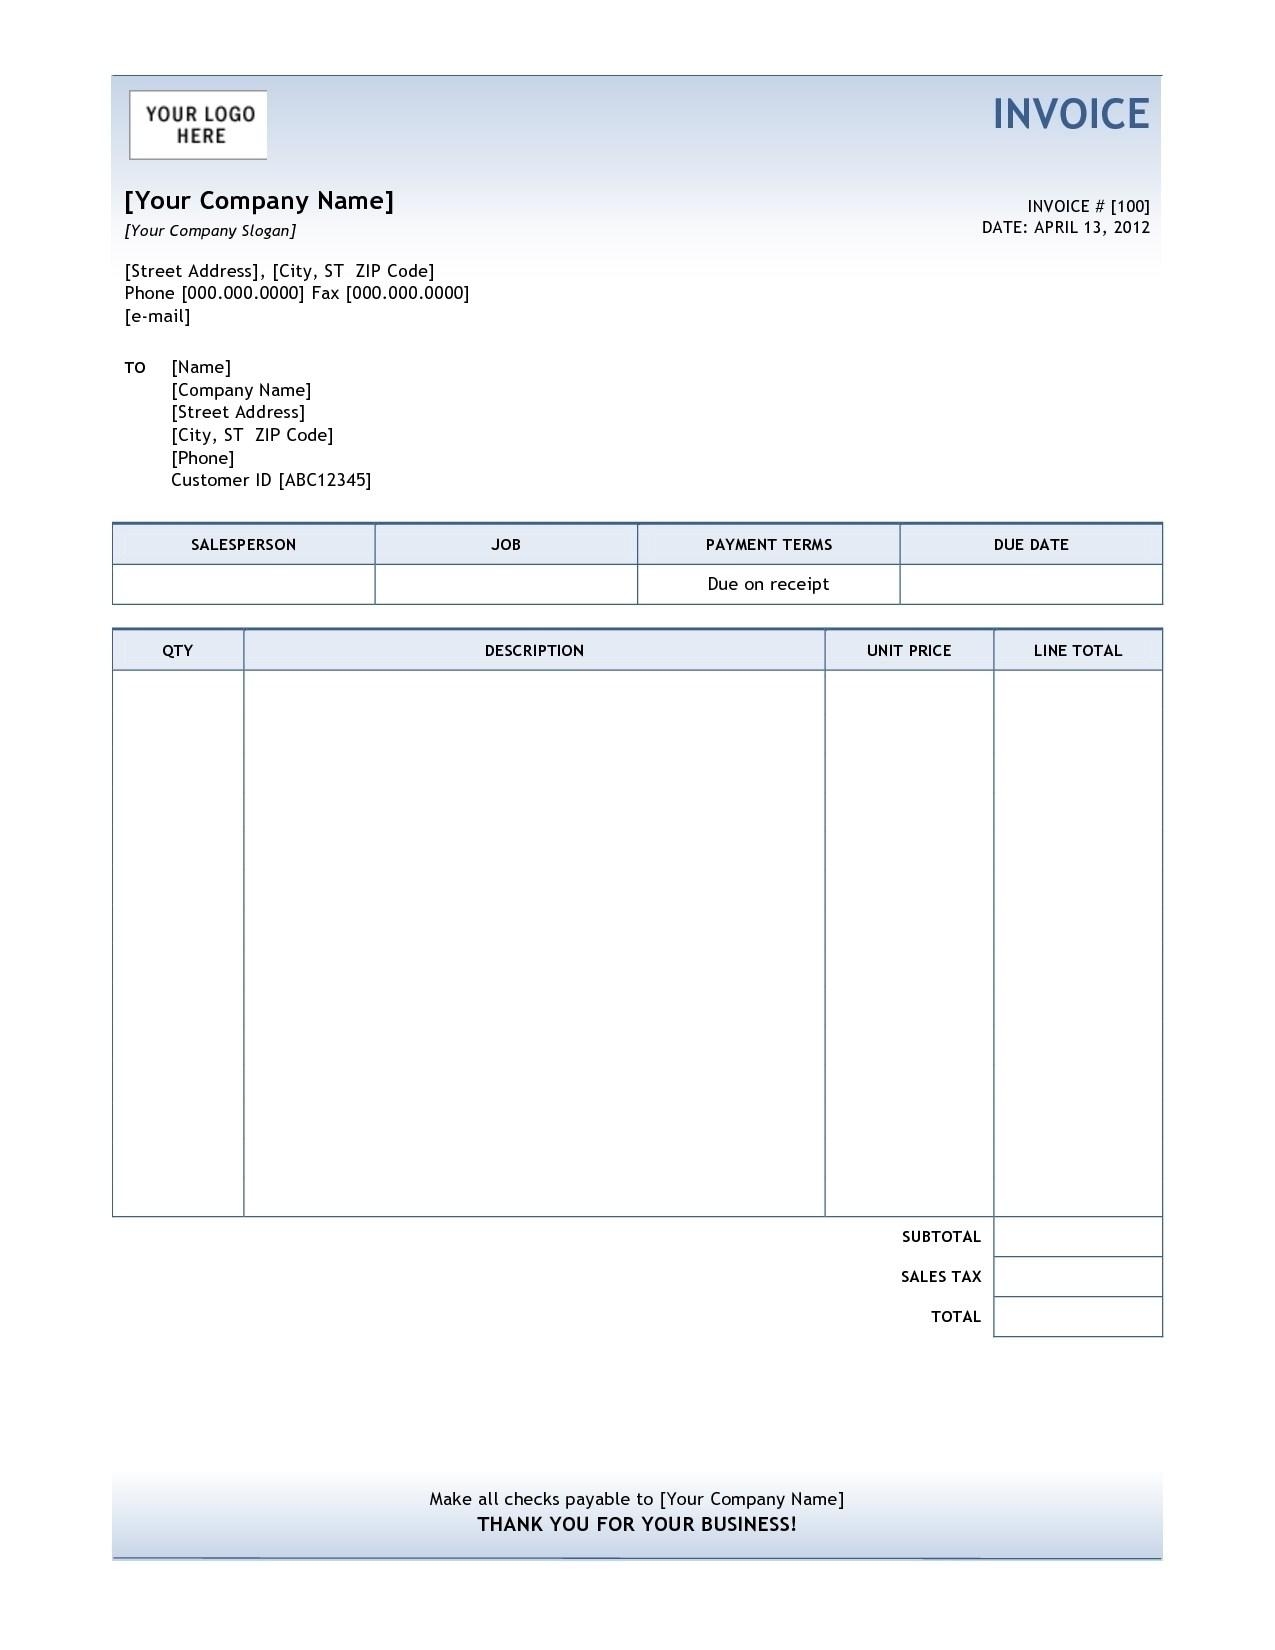 quickbooks import invoice from excel free invoice quickbooks import invoice